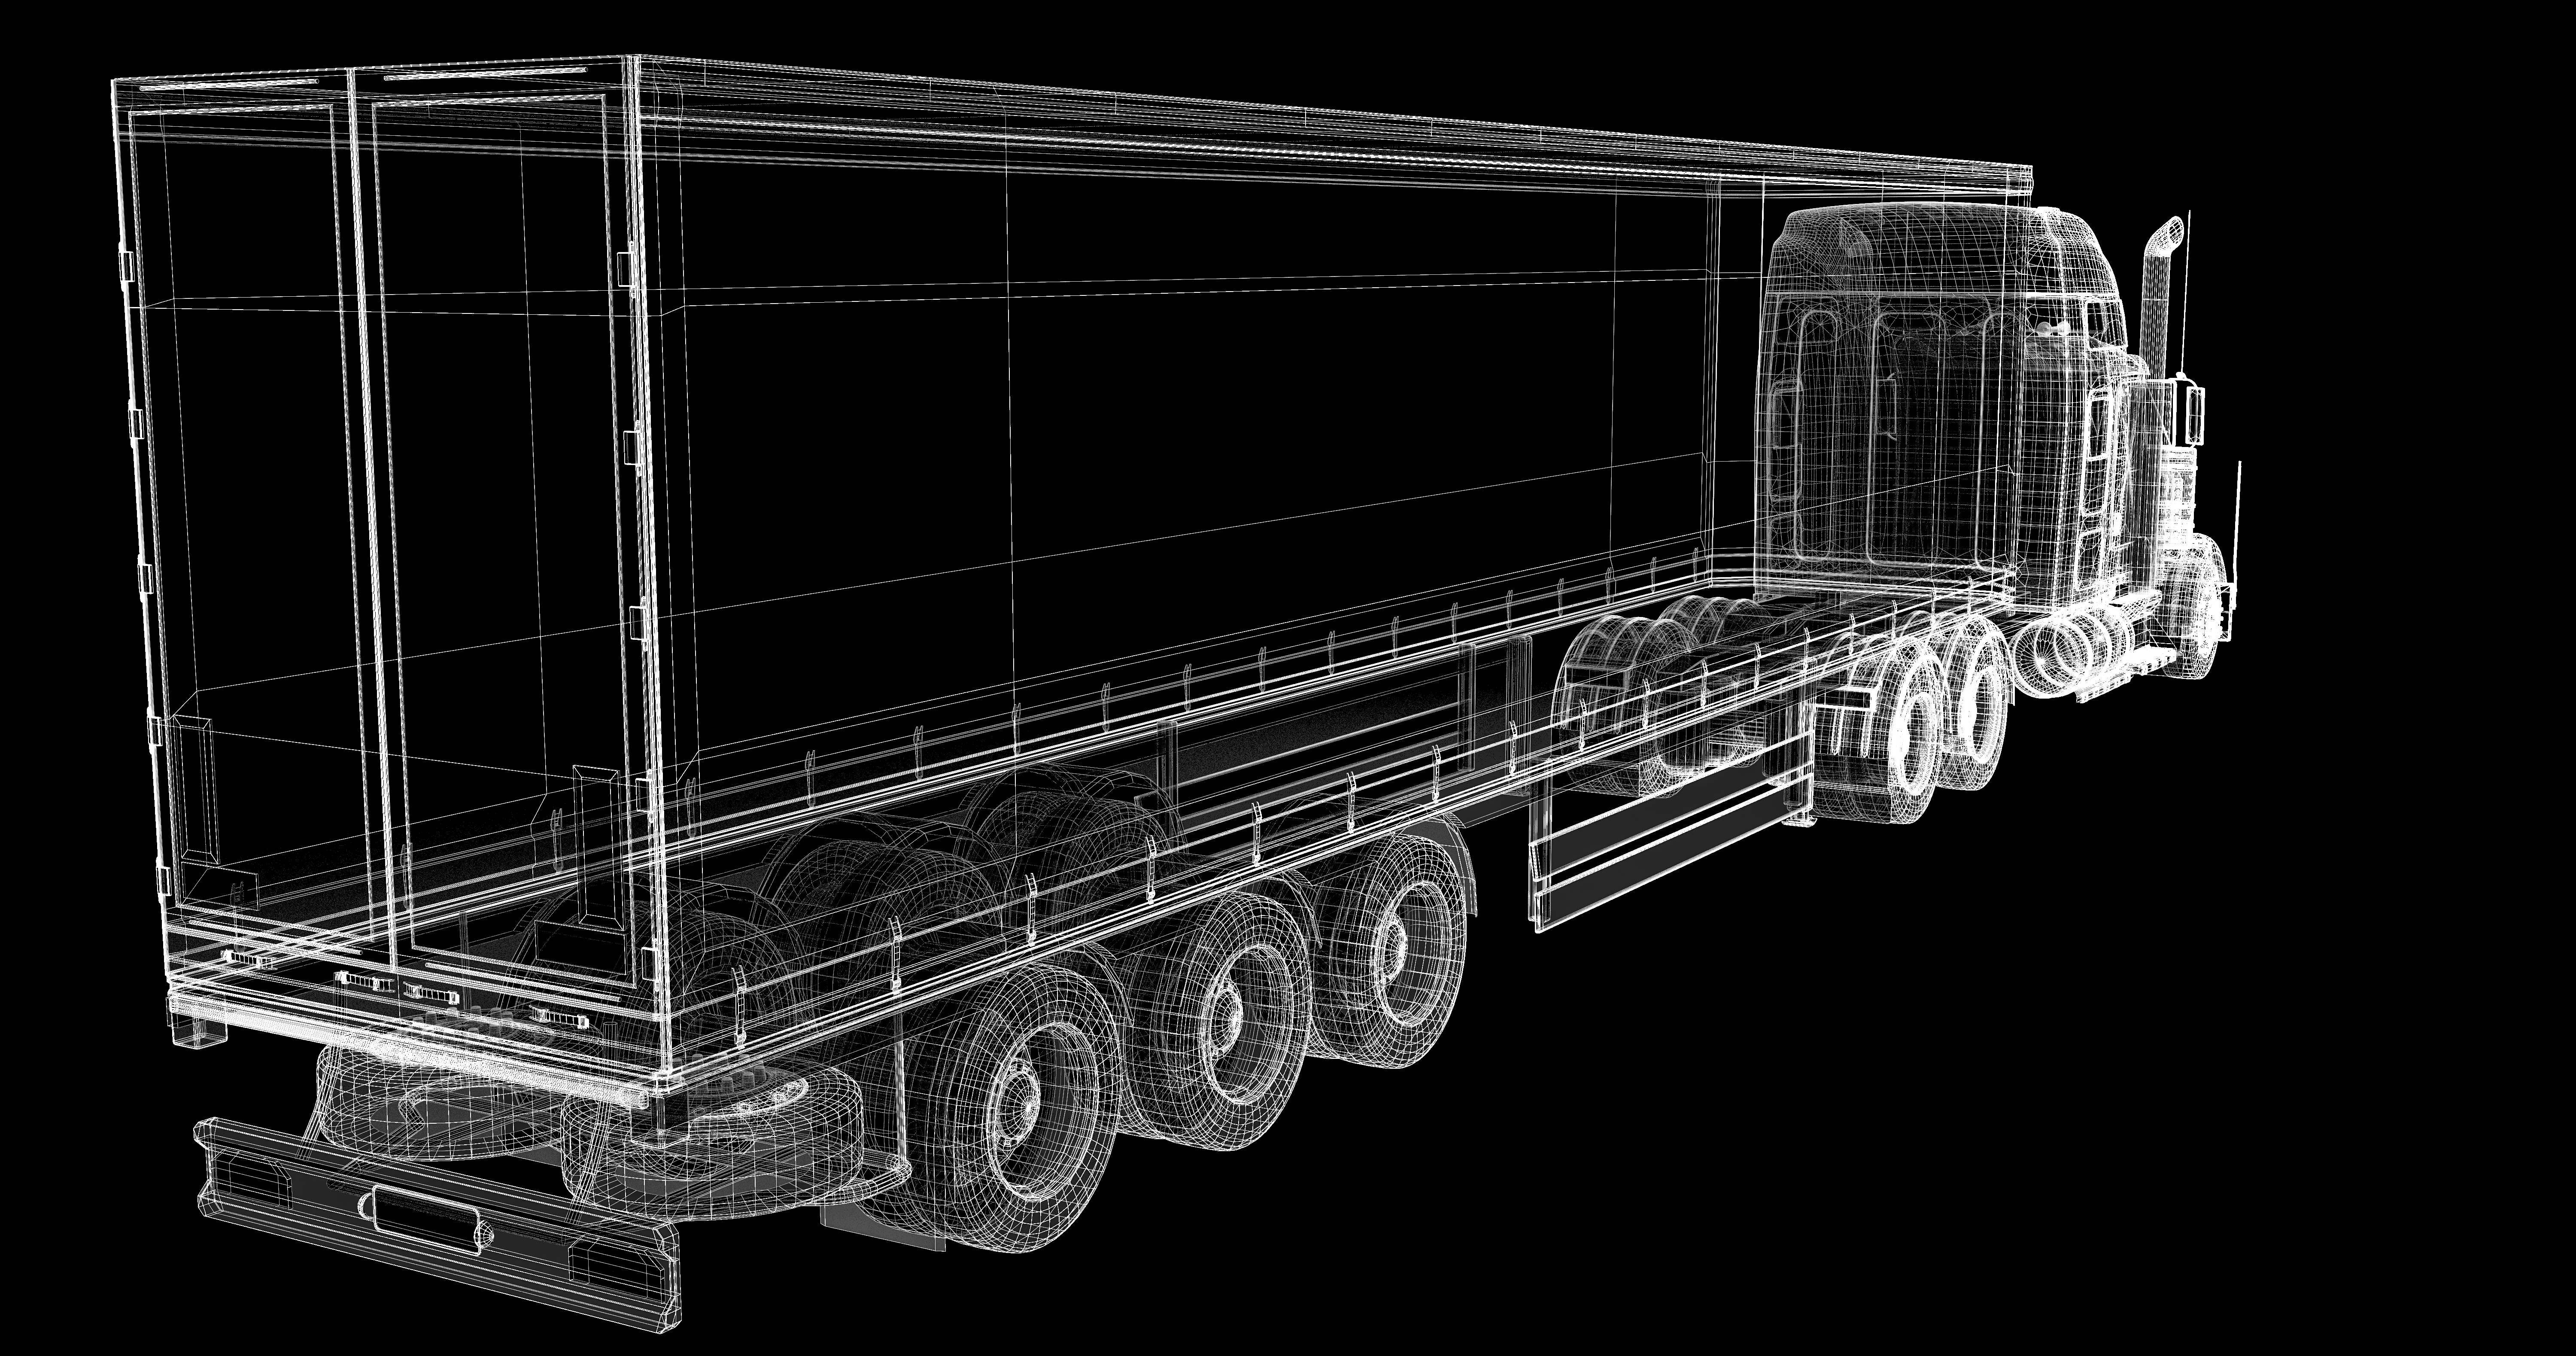 The impact of 3-D profiling computer software on quality control in truck washing